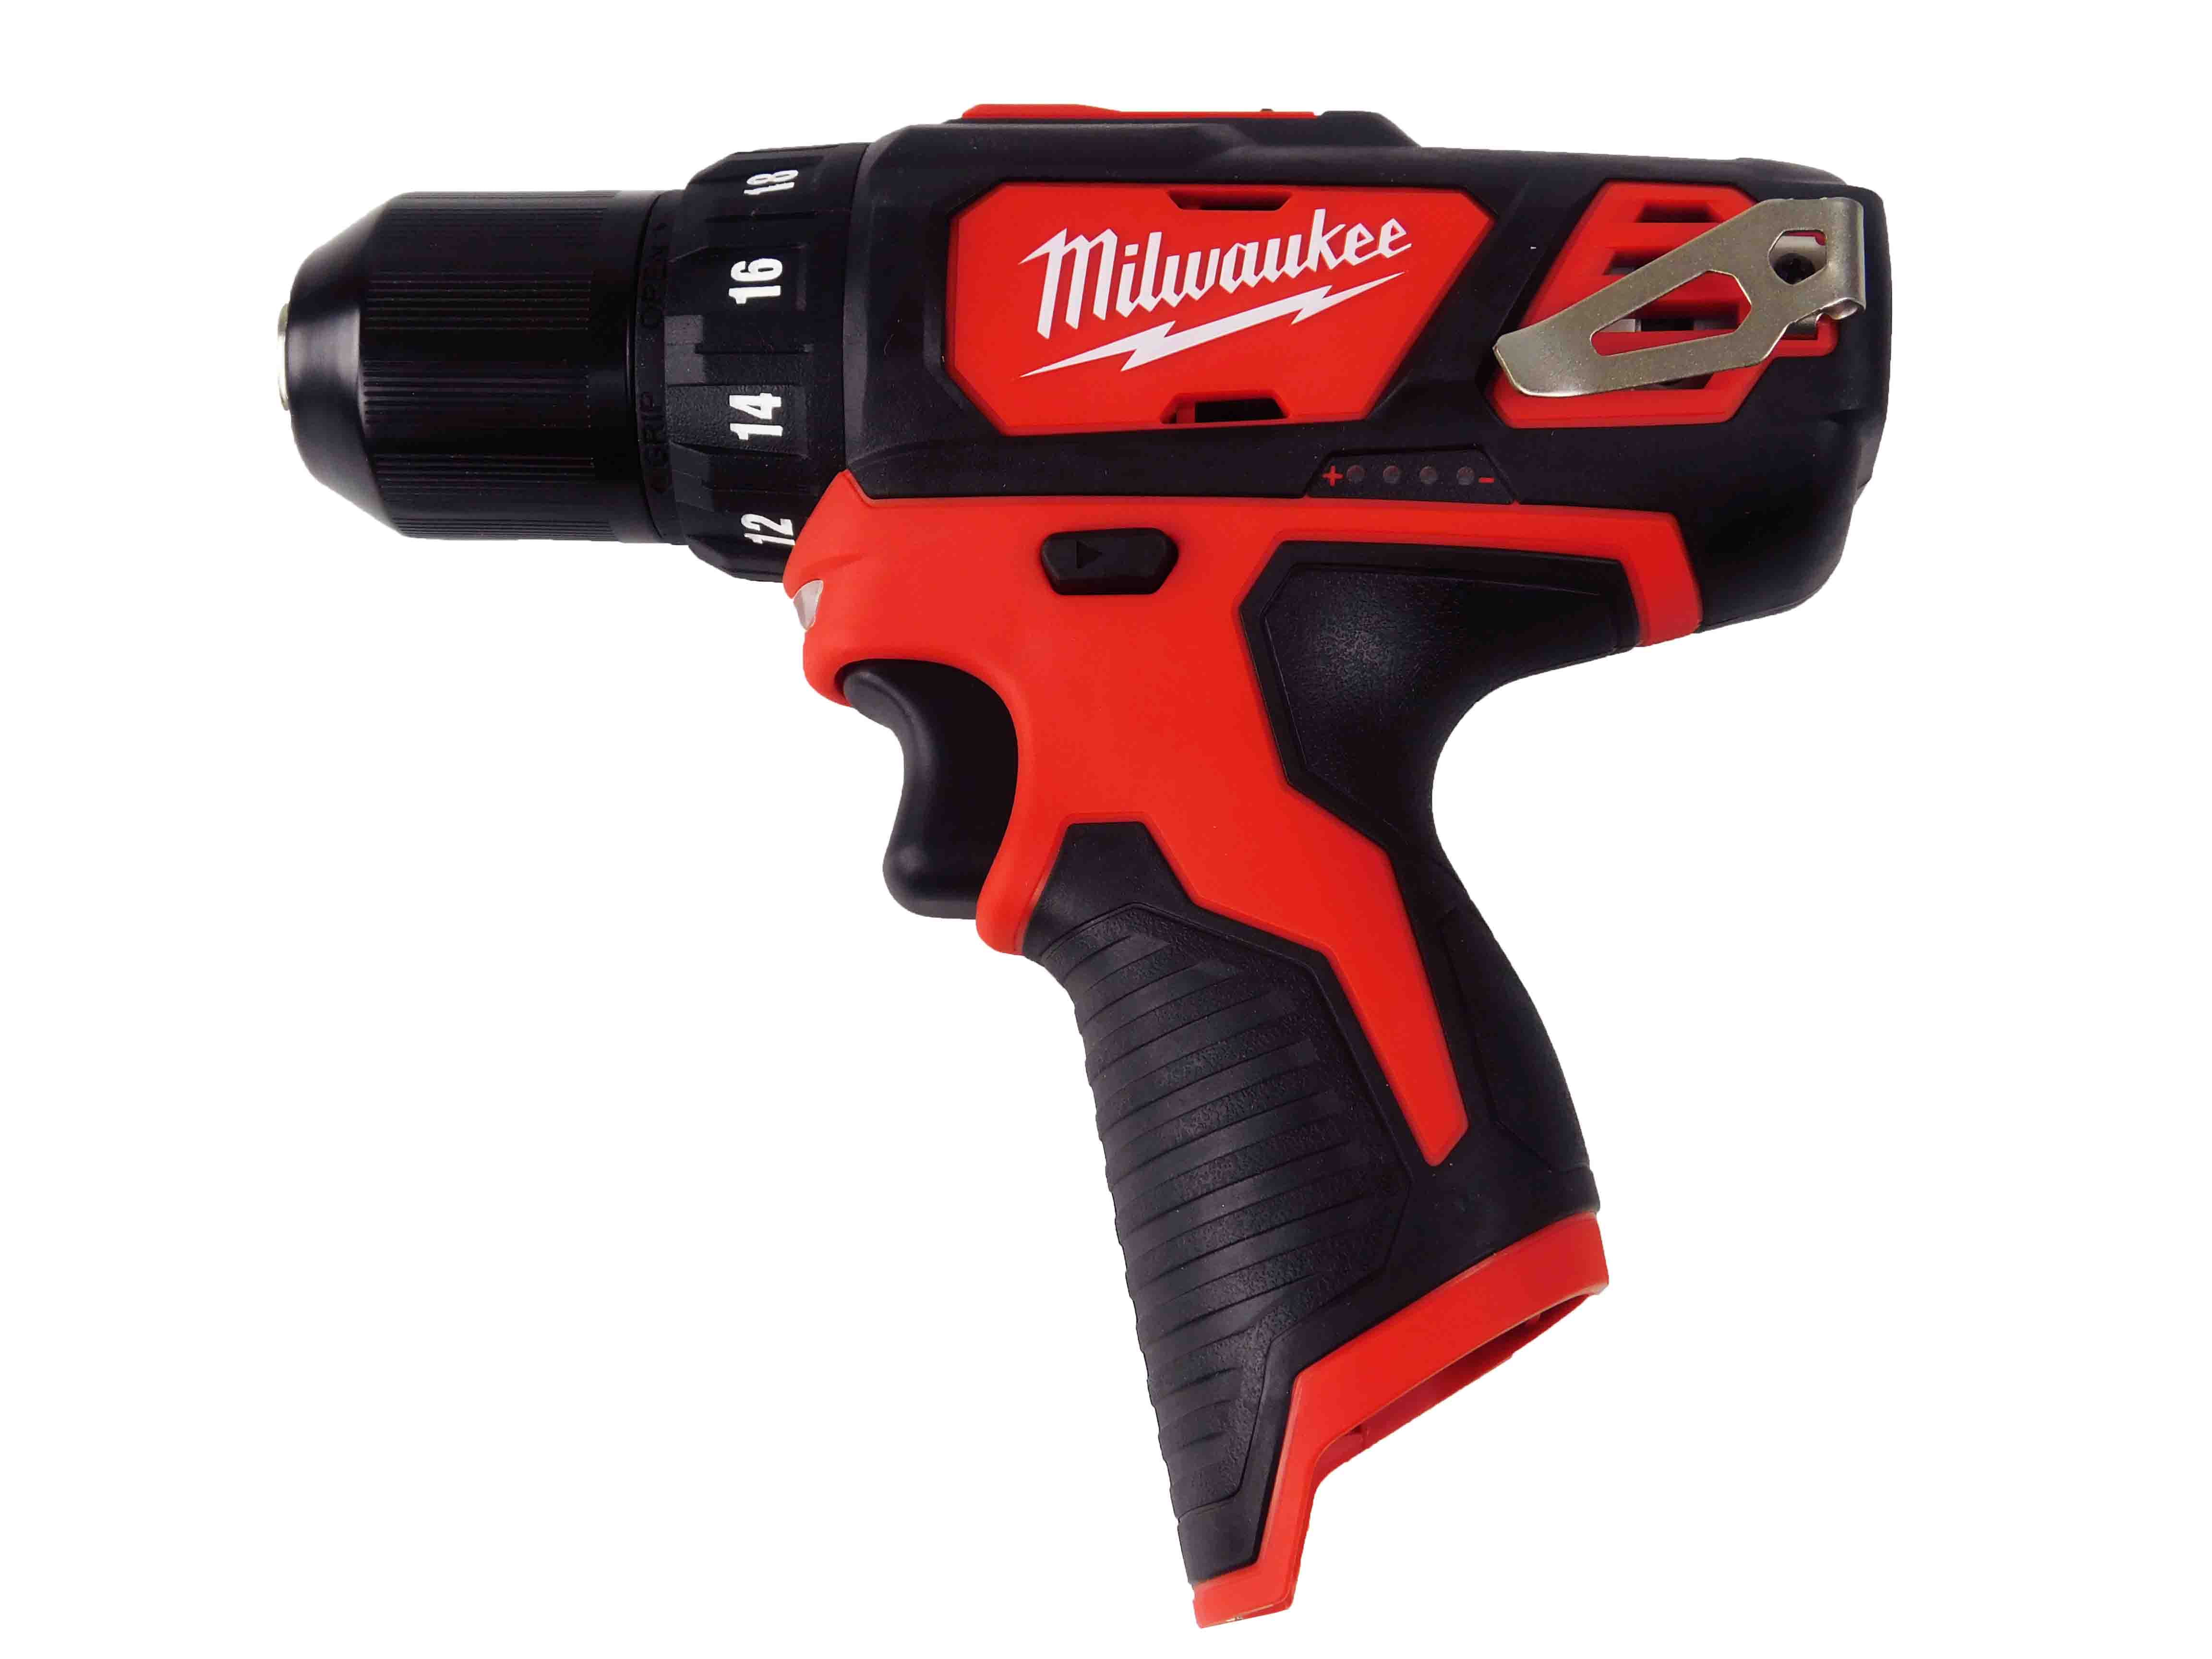 2407-20 Bare Tool Only - Battery, Charger, and Accessories Not Included Milwaukee M12 12V 3/8-Inch Drill Driver 